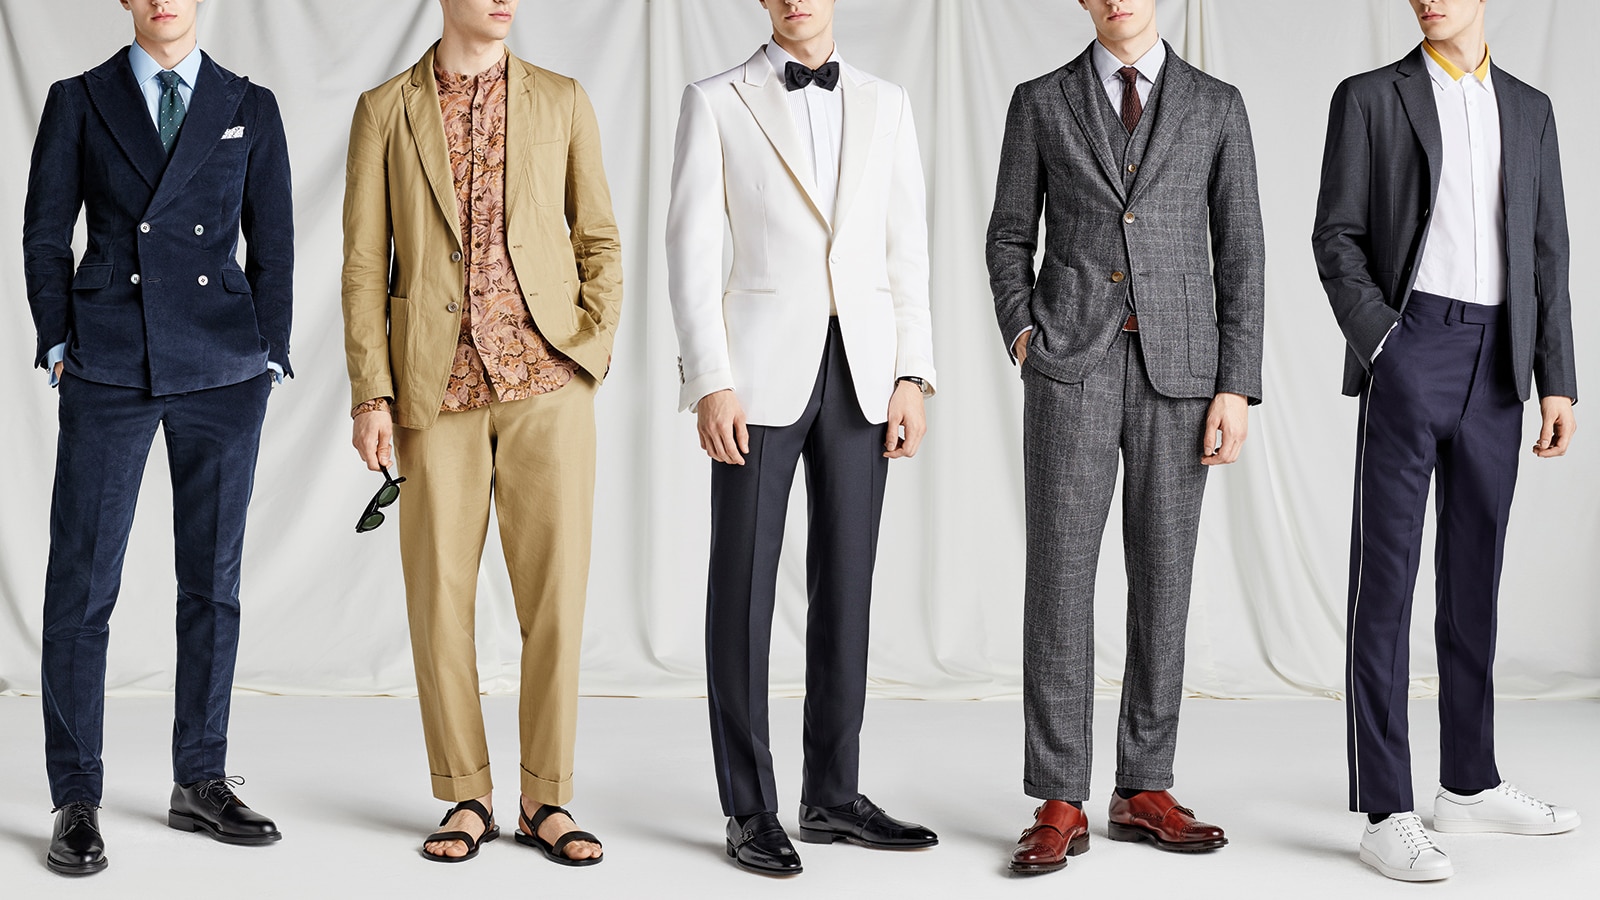 Five Men's Wedding Outfits For Spring 2018 | The Journal | MR PORTER